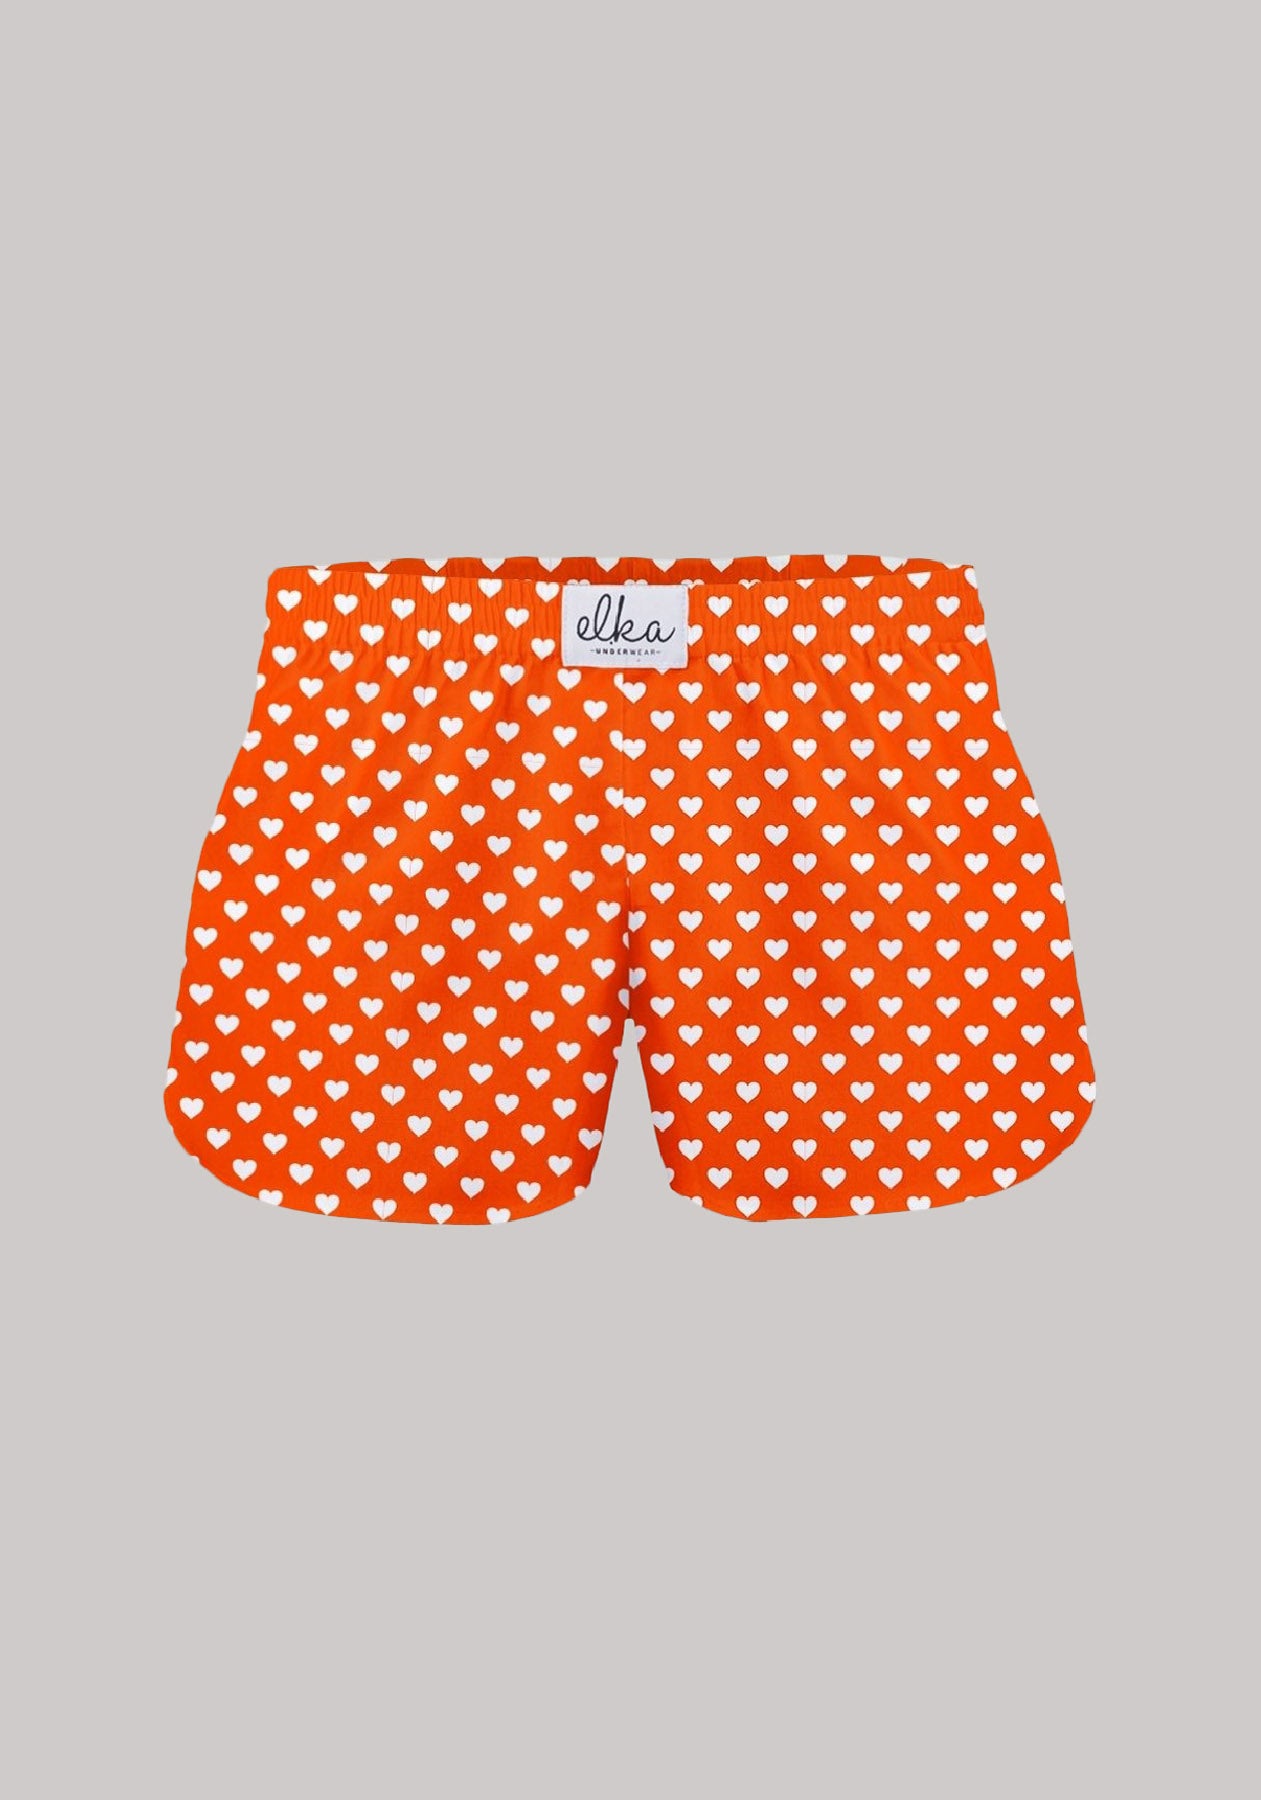 Women's shorts Red-orange with hearts